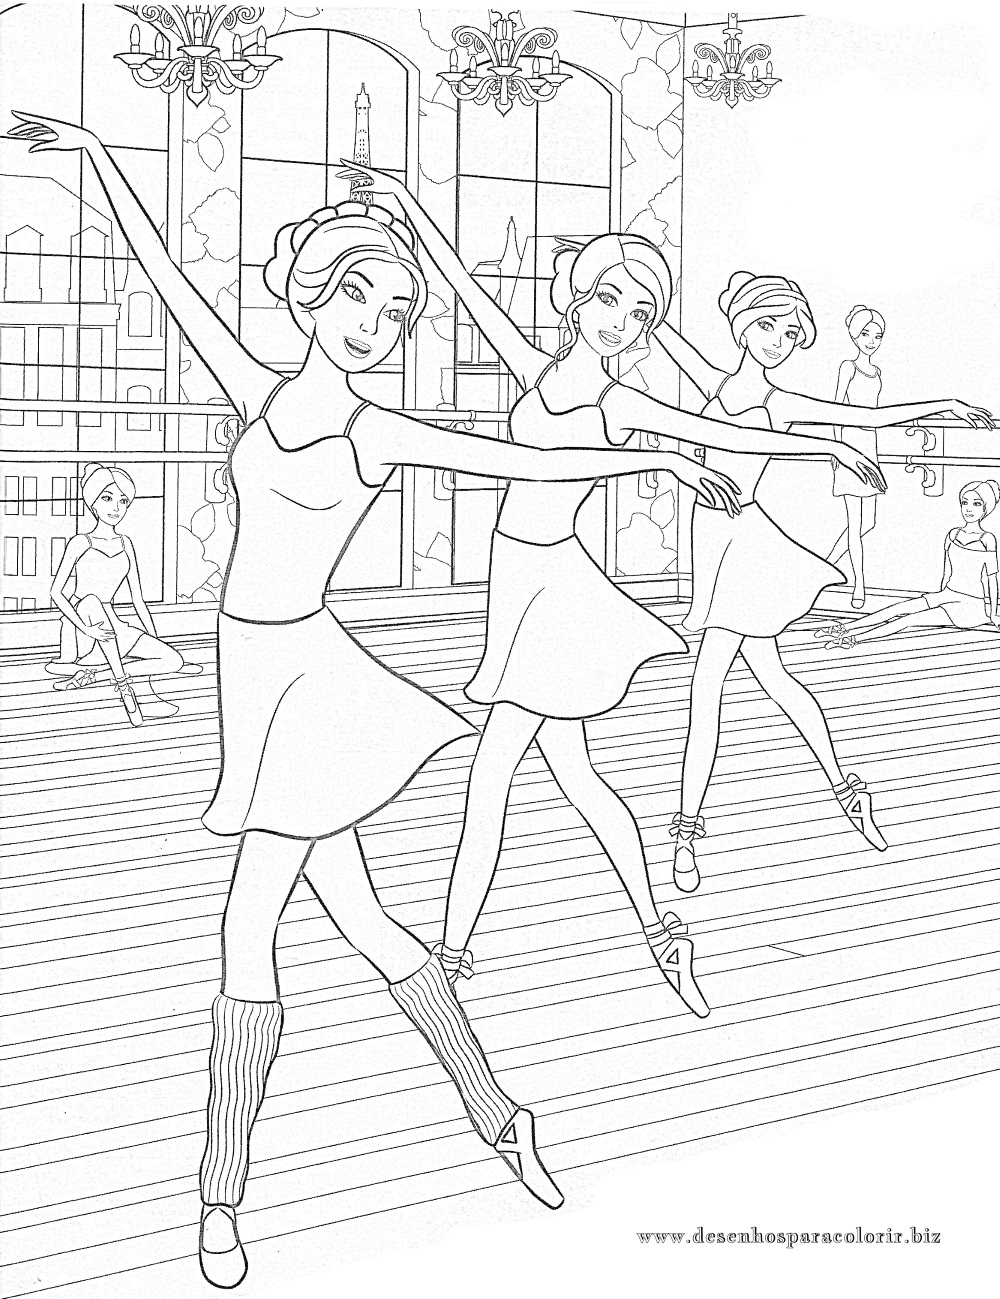 barbie-14.jpg (1000×1299) | Dance coloring pages, Coloring pages